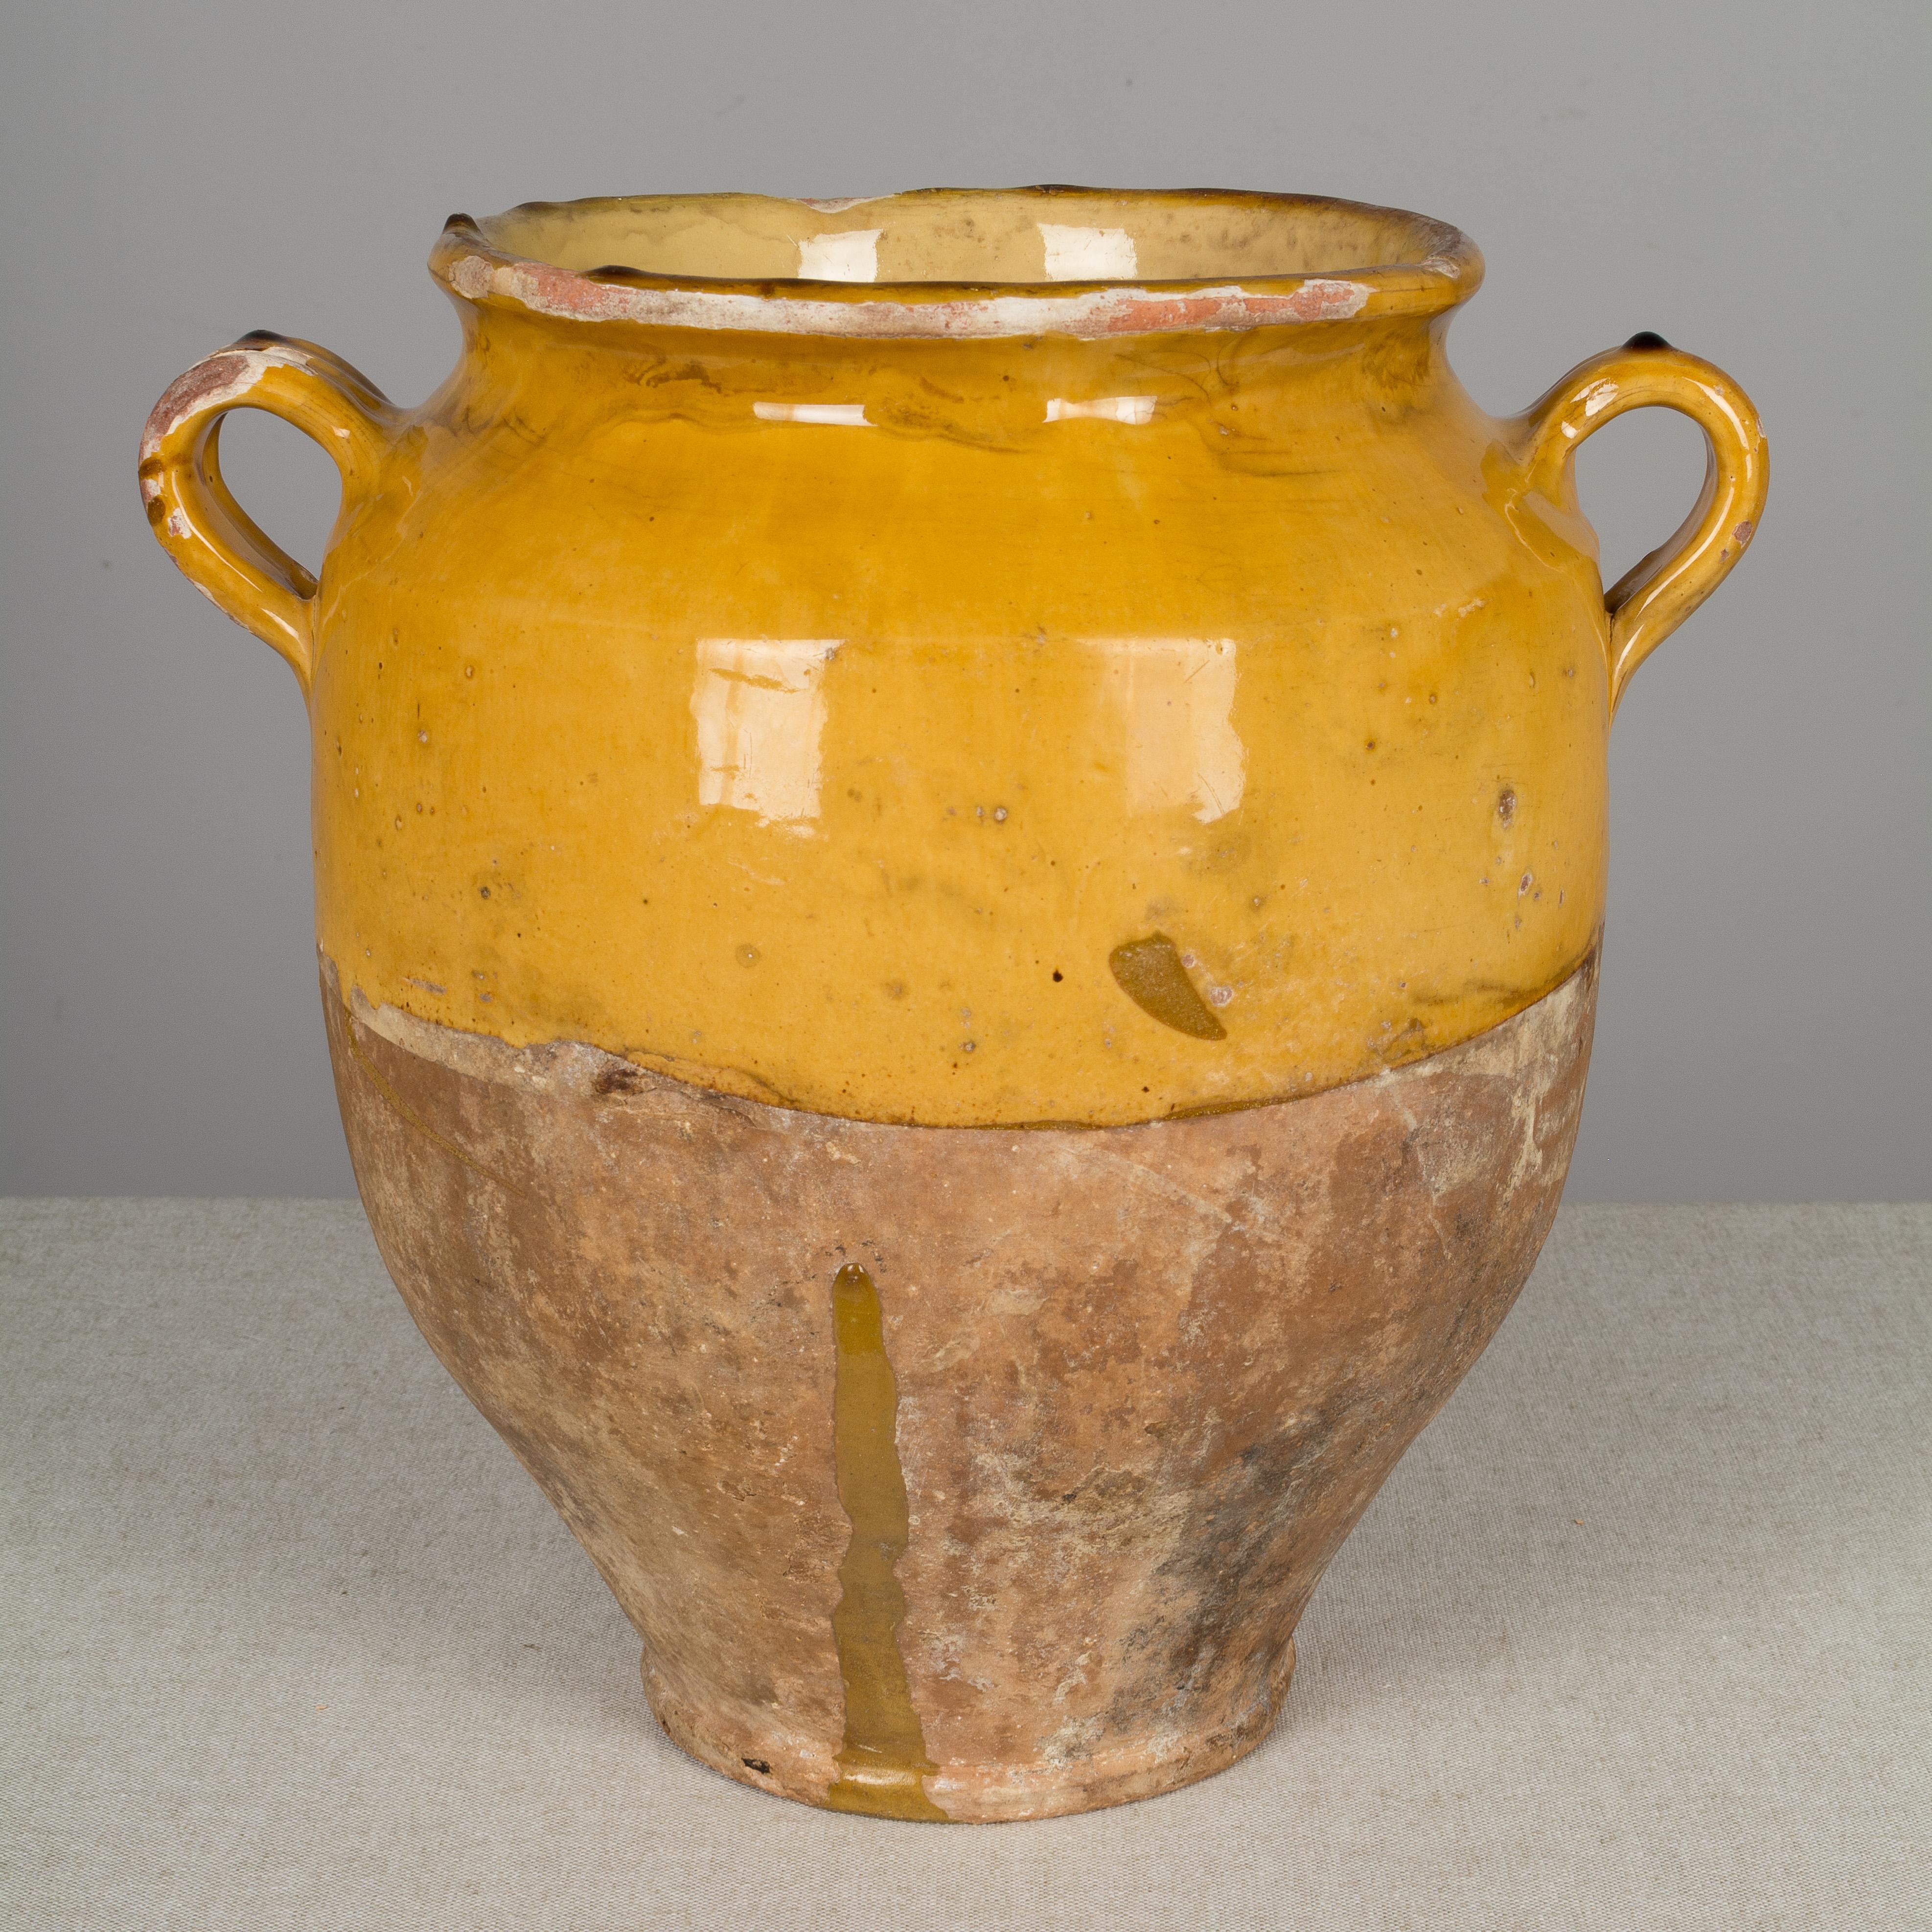 An earthenware confit pot from the Southwest of France with traditional yellow glaze. Beautiful patina and bright yellow color. Minor losses to glaze. Weight: 7.4 lbs. These ordinary earthenware vessels were once used daily in the French country